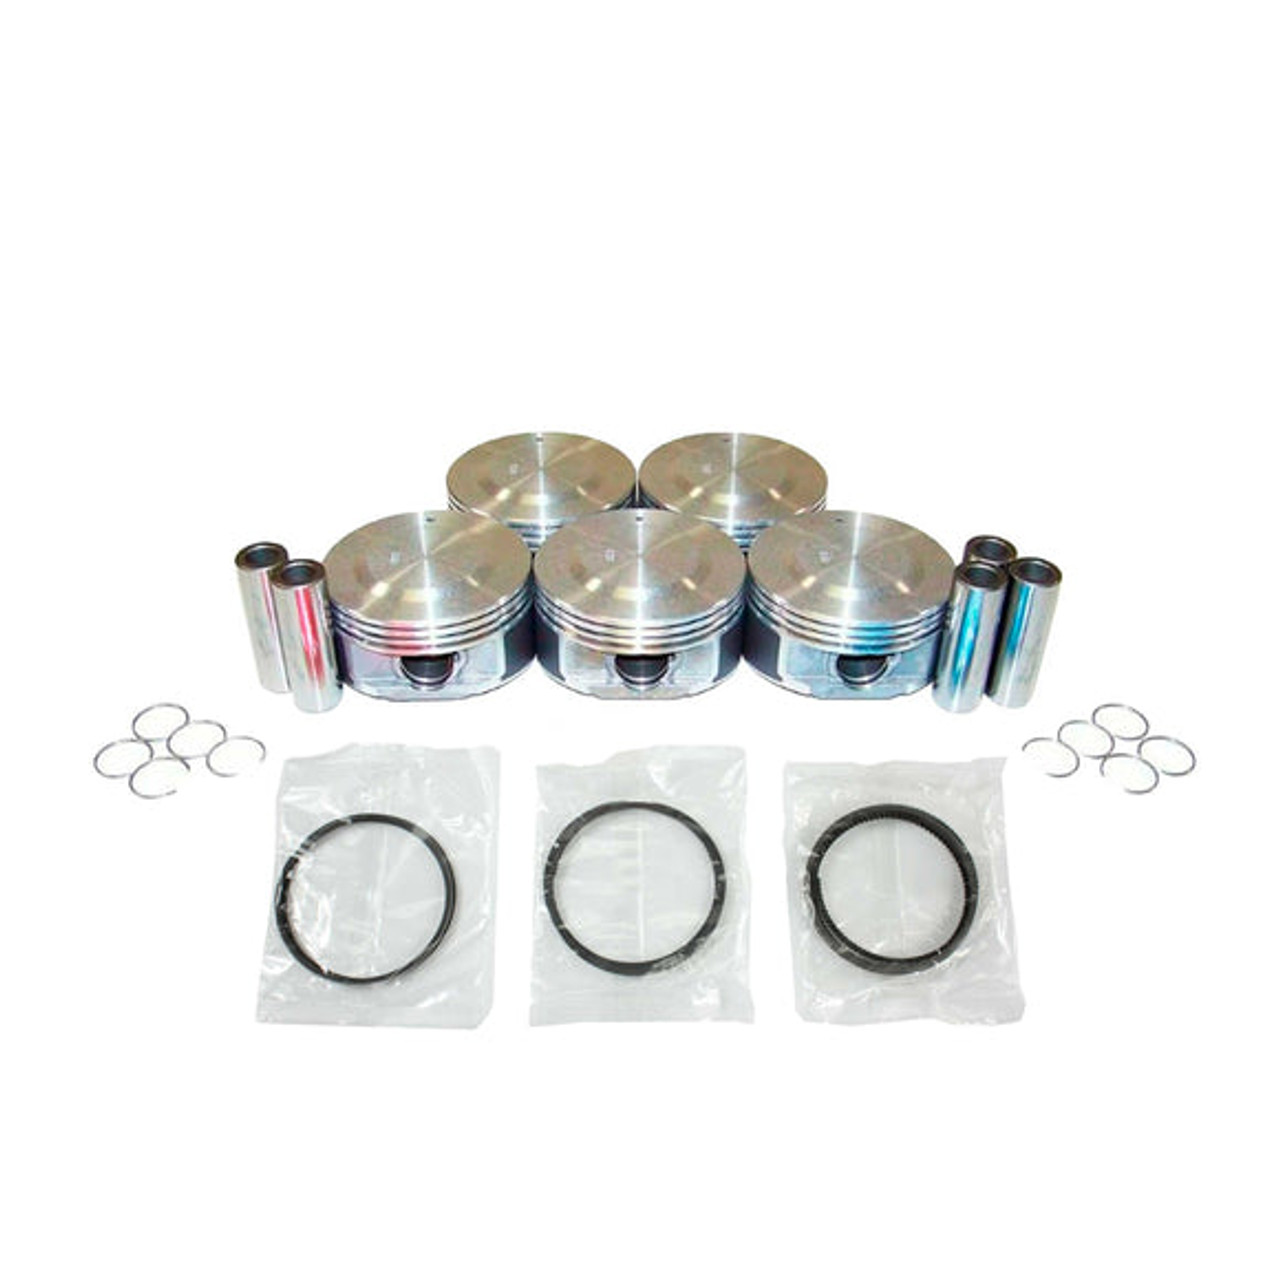 Piston Set with Rings - 2006 Hummer H3 3.5L Engine Parts # PRK3122ZE13